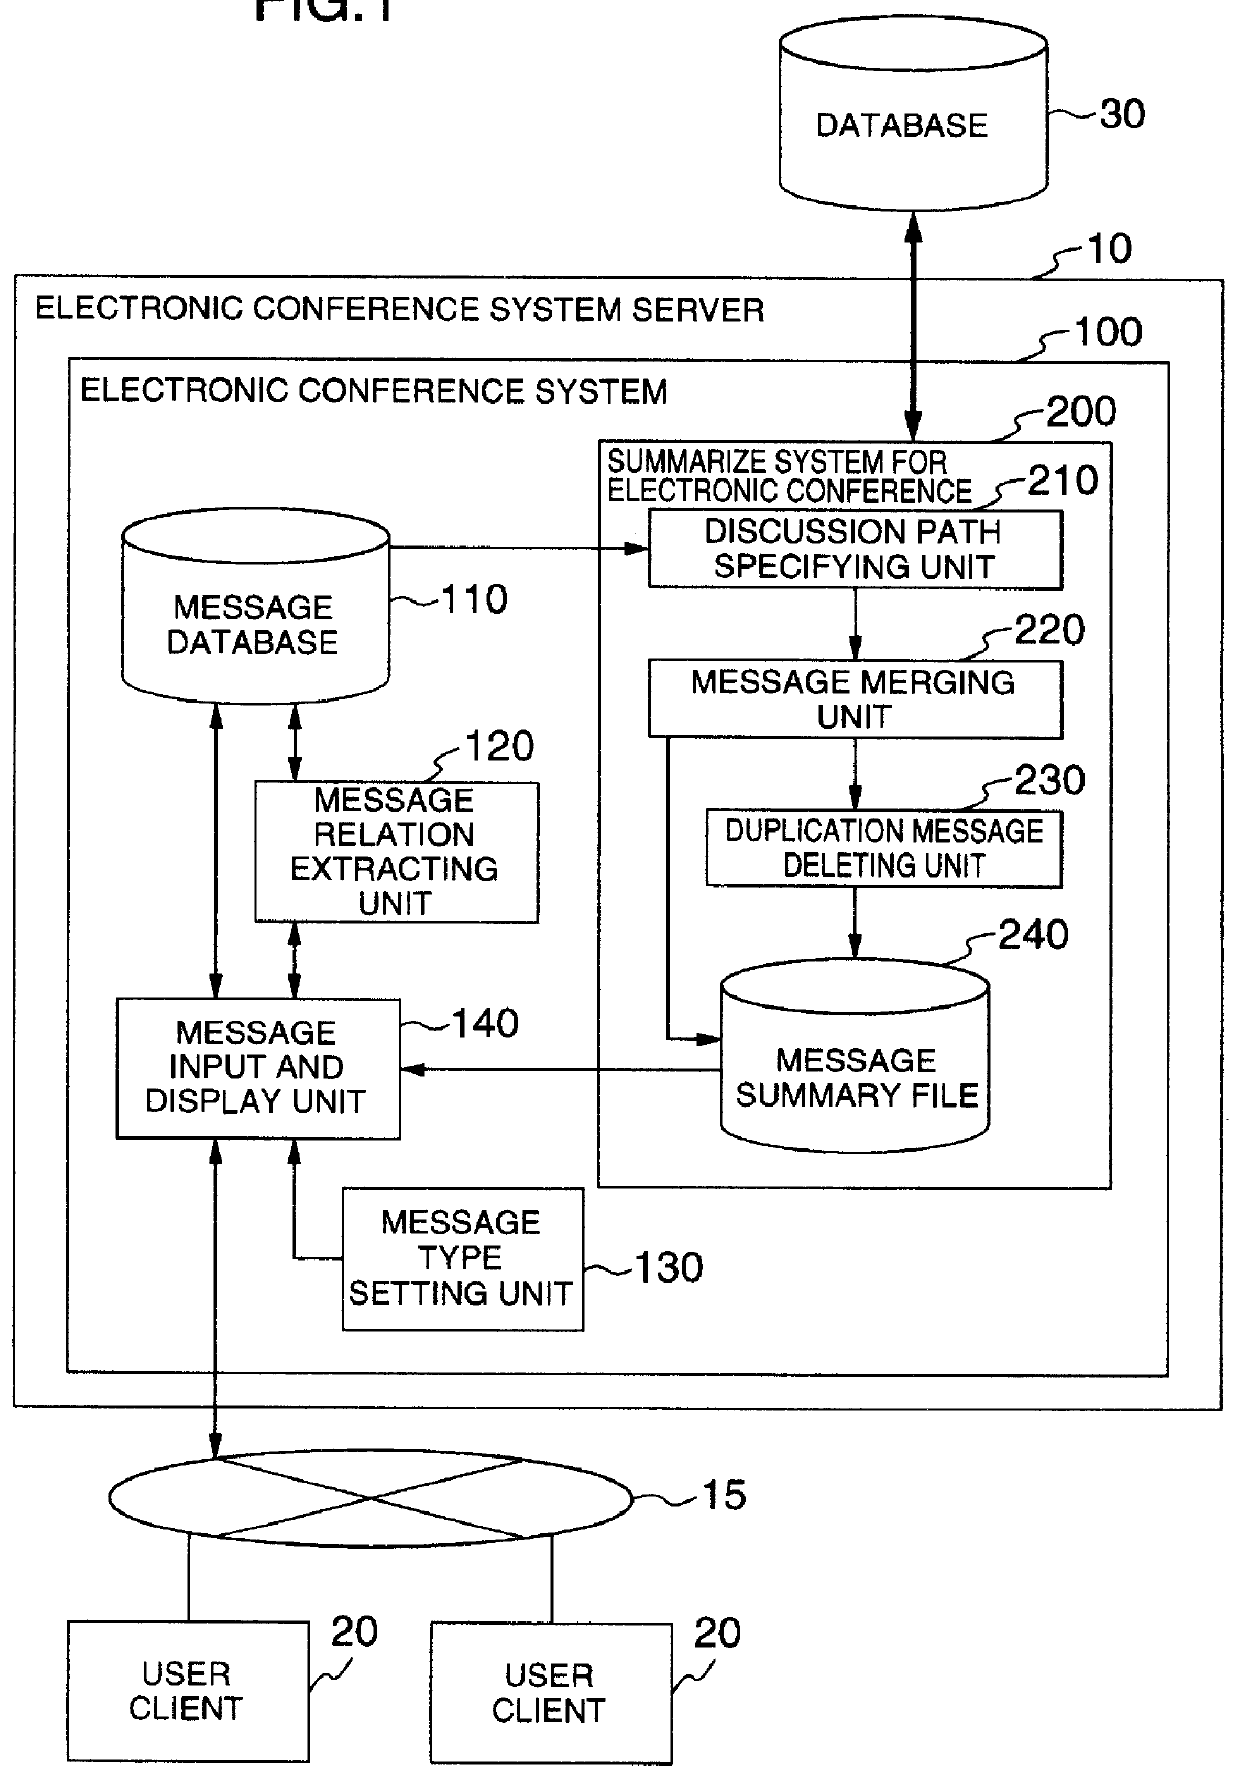 Electronic conference system